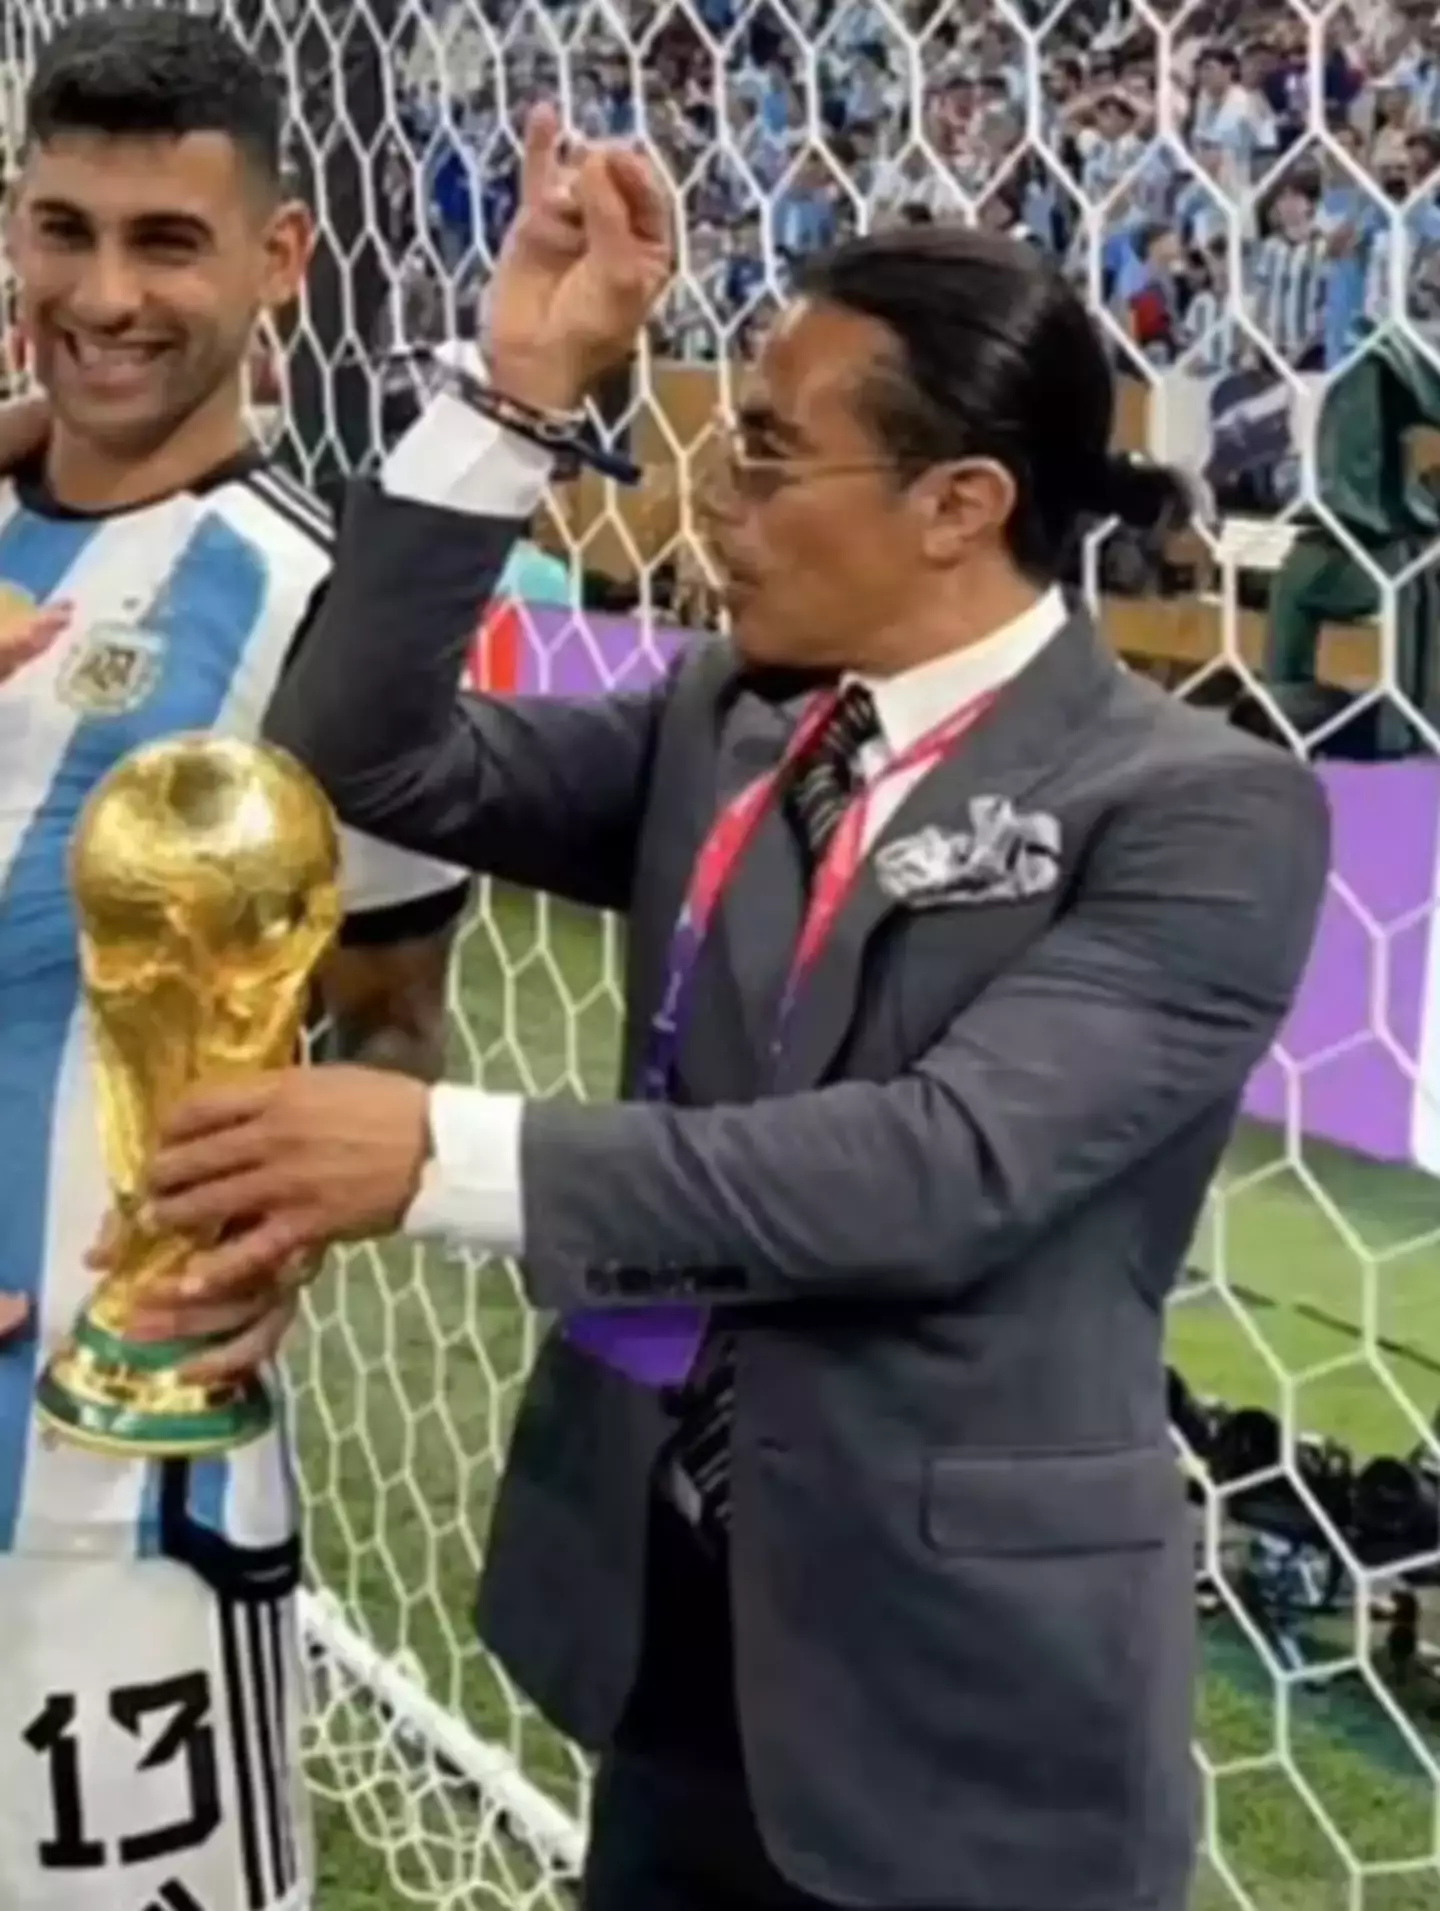 Salt Bae caused controversy at the World Cup.